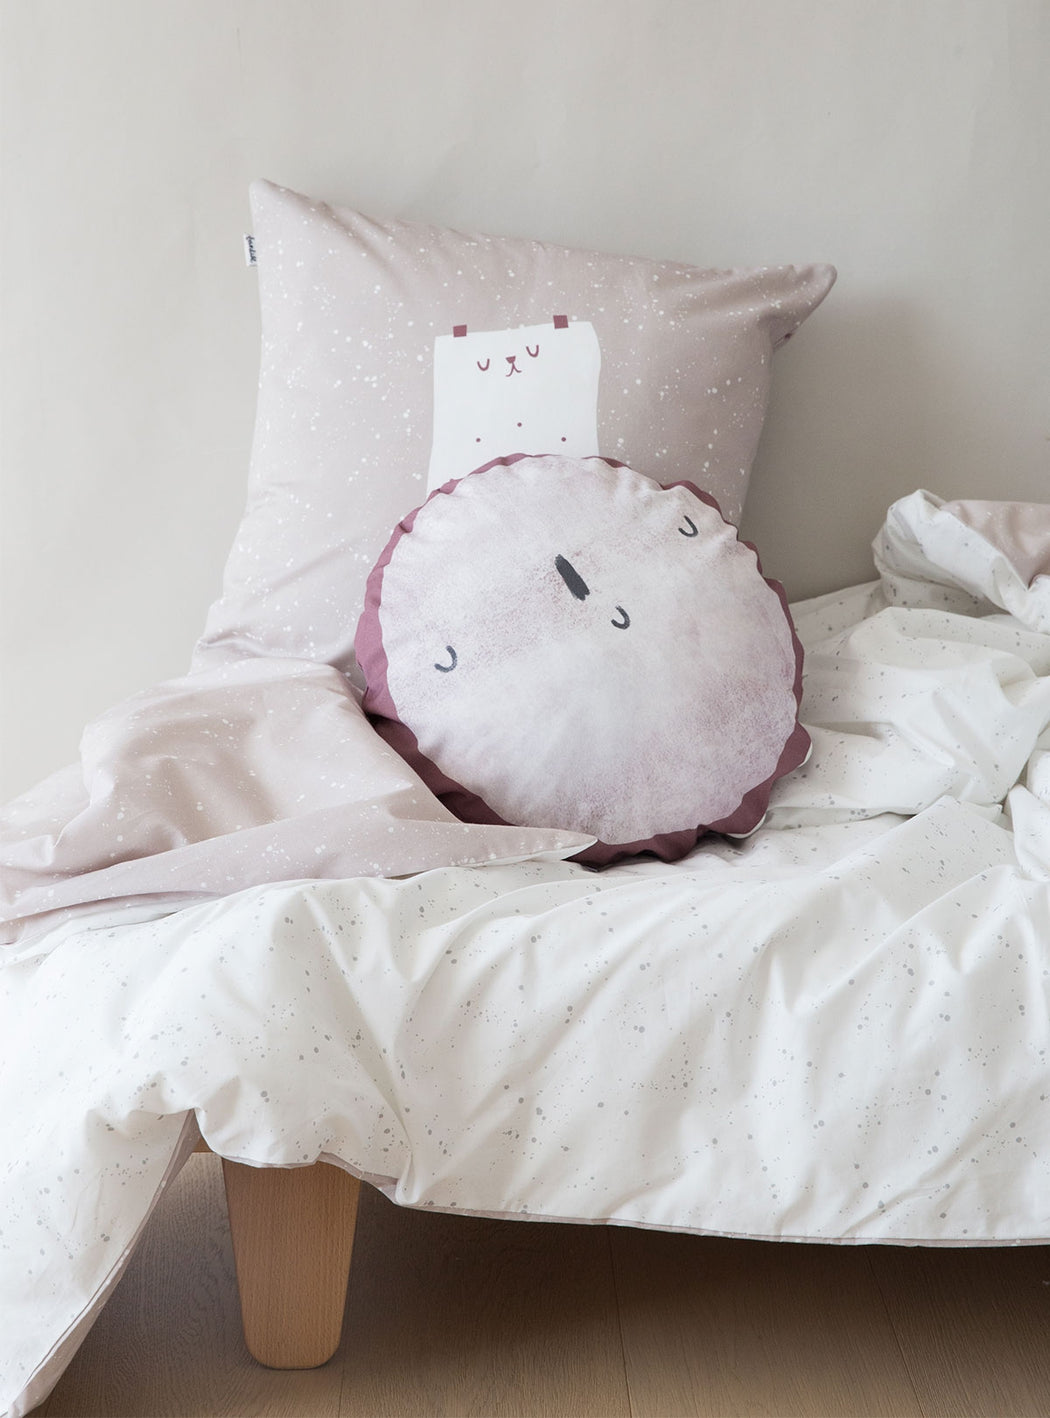 Set of Pink Cosmos Duvet cover for bed of 90 cm + Bang, zoom to the moon Pillow 40 cm